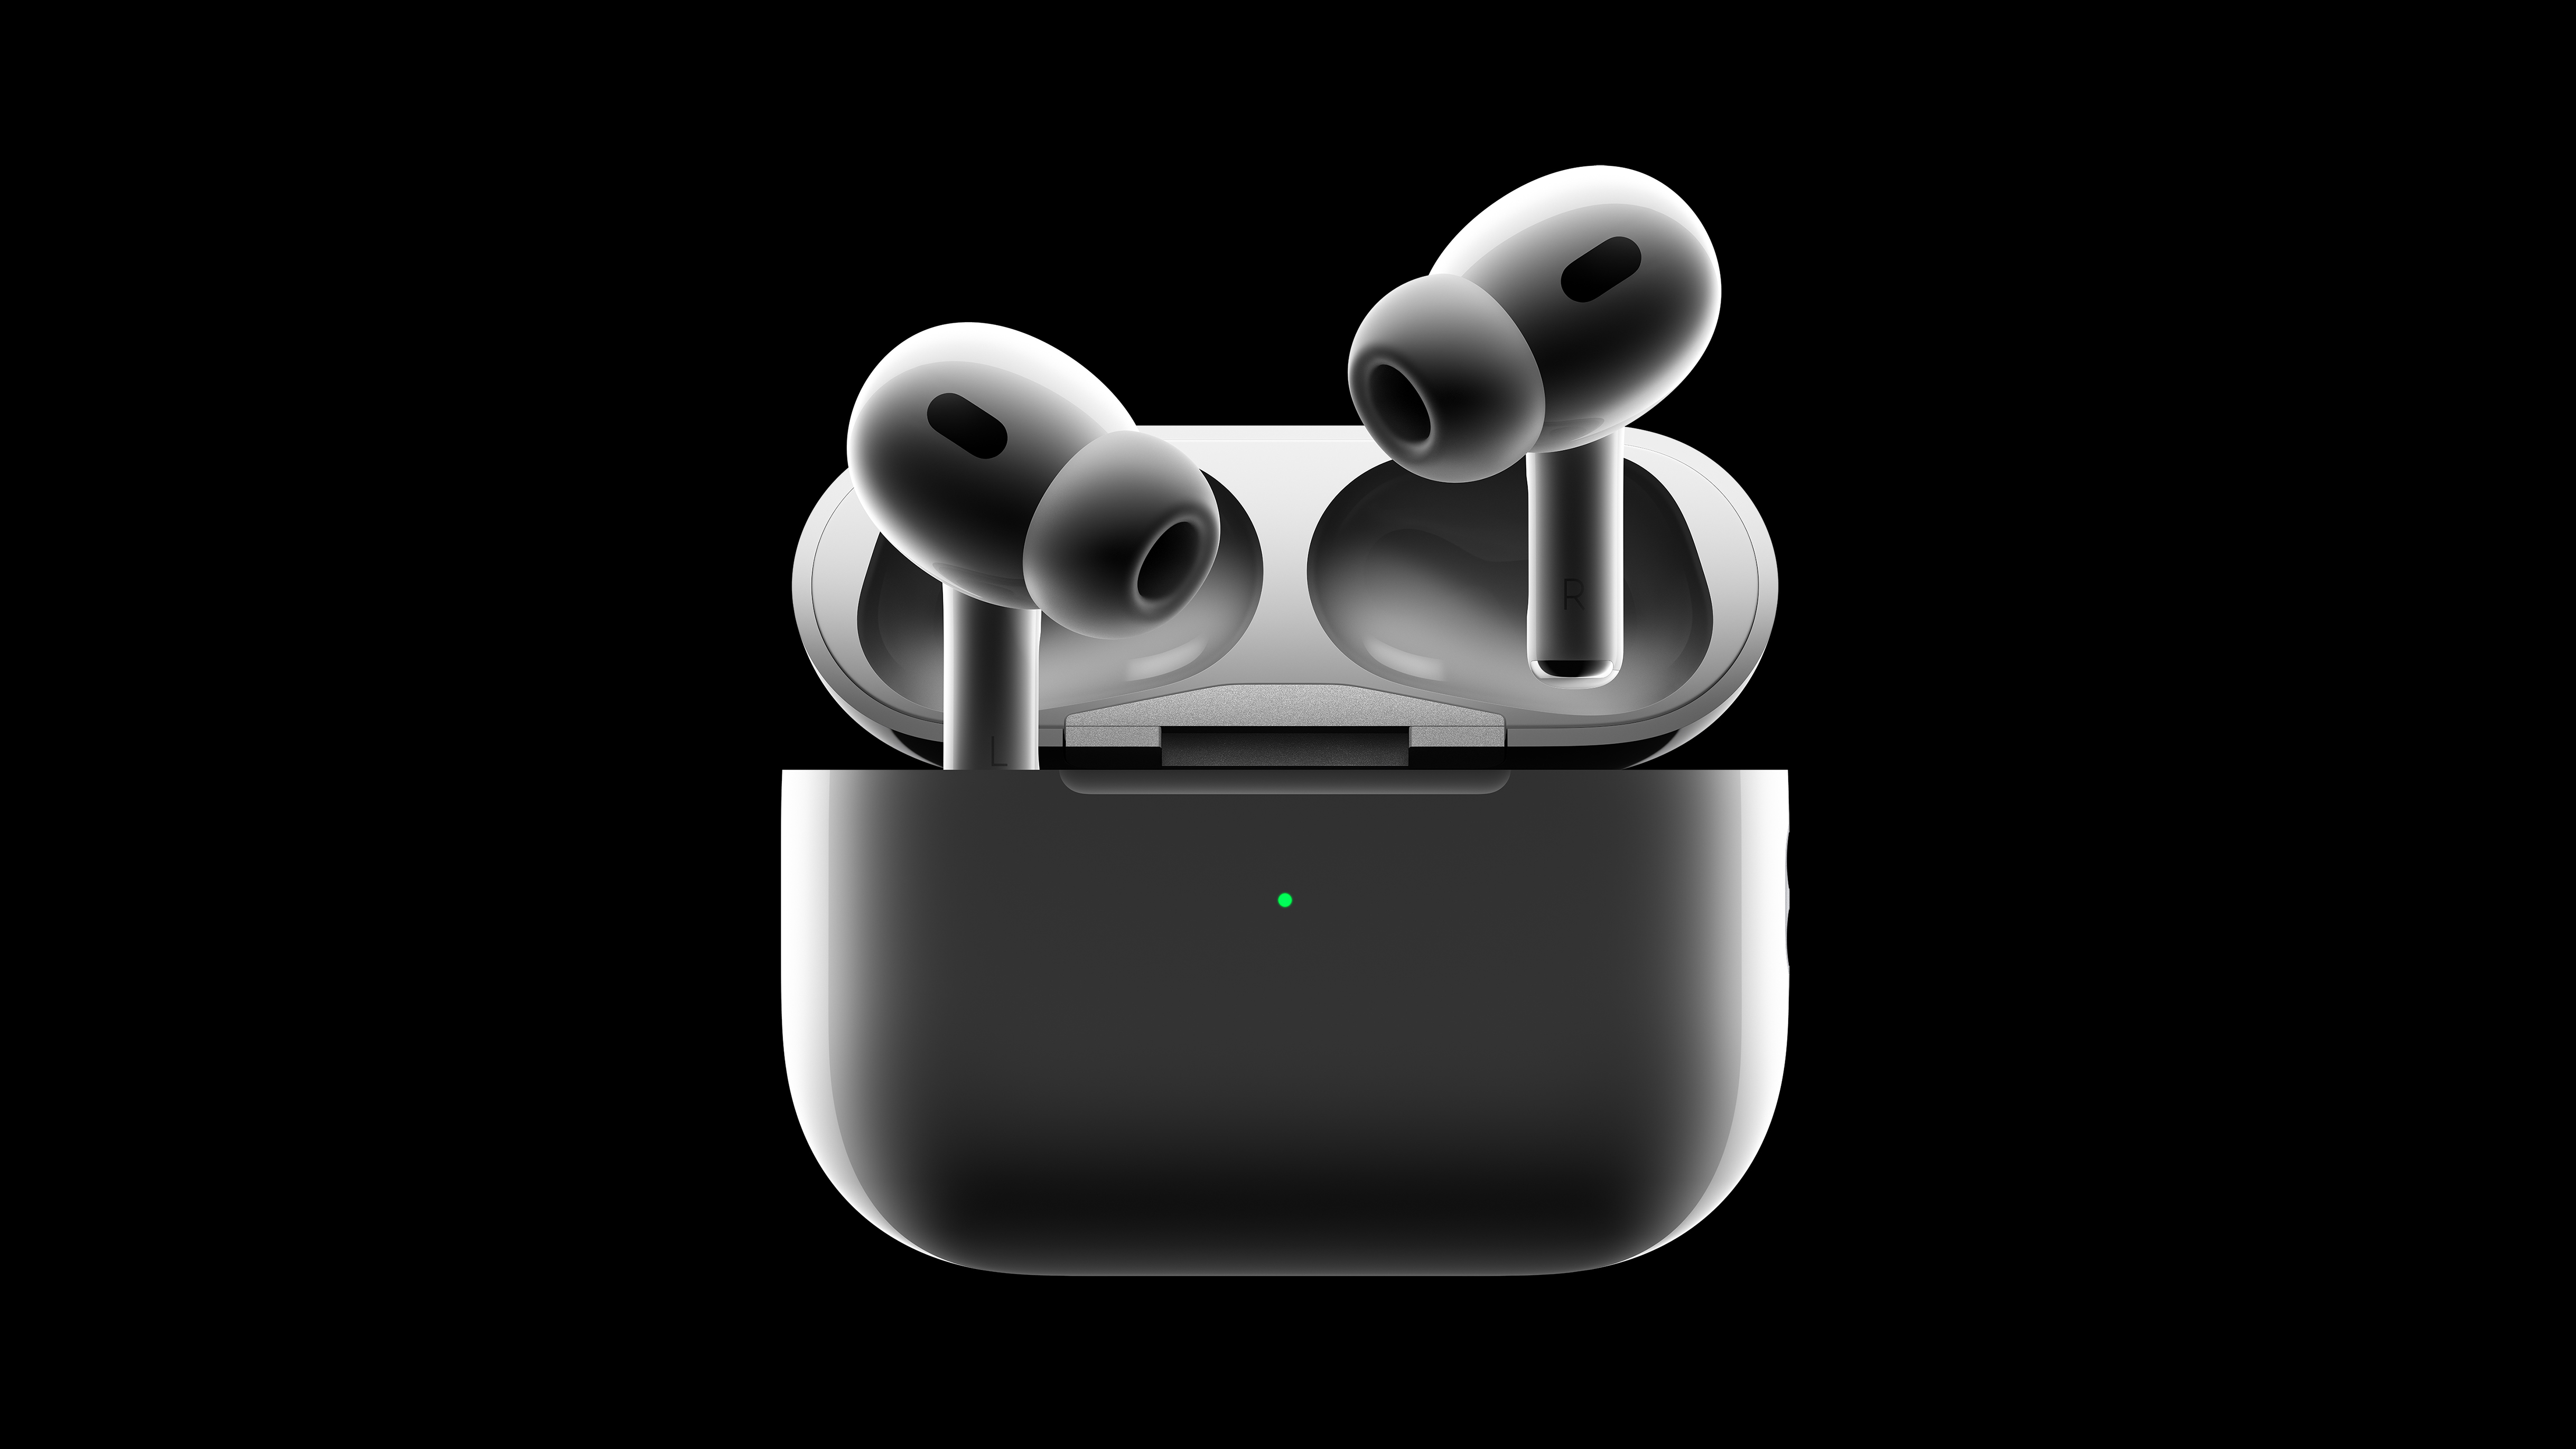 AirPods Pro 2 buttons sticking out of the case on a black background